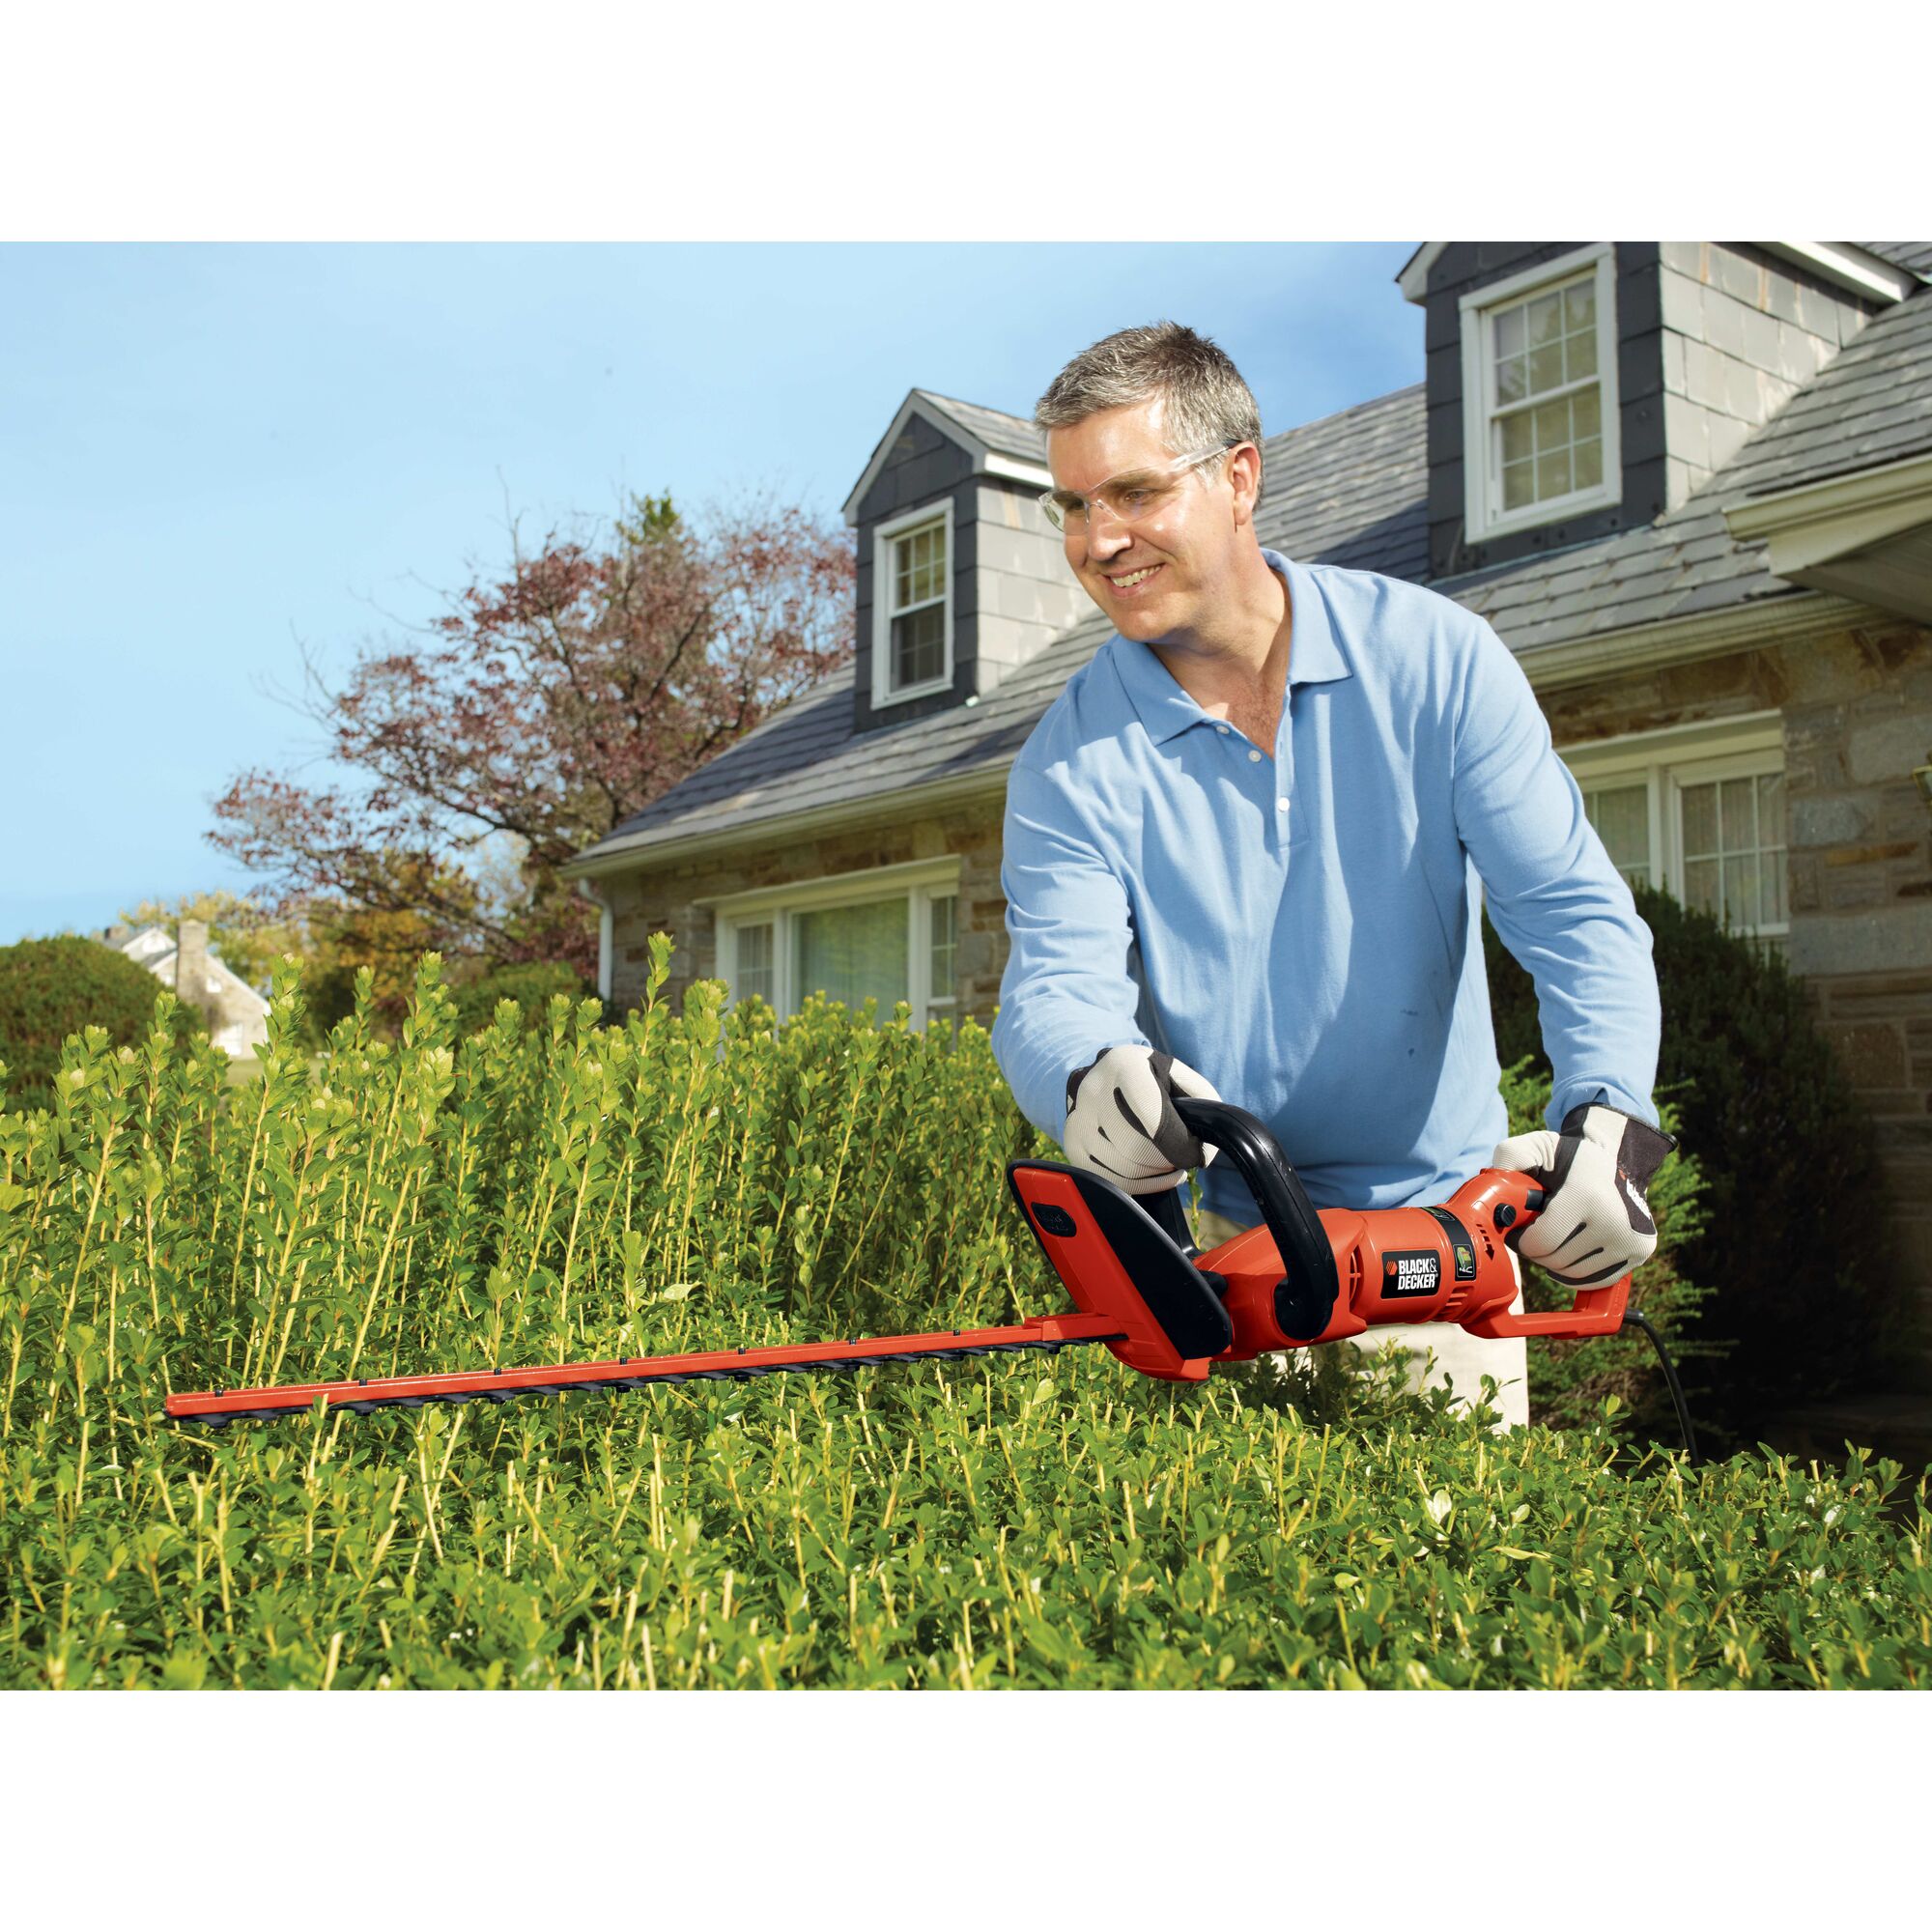 24 inch hedge trimmer with rotating handle being used by a person to trim a hedge.